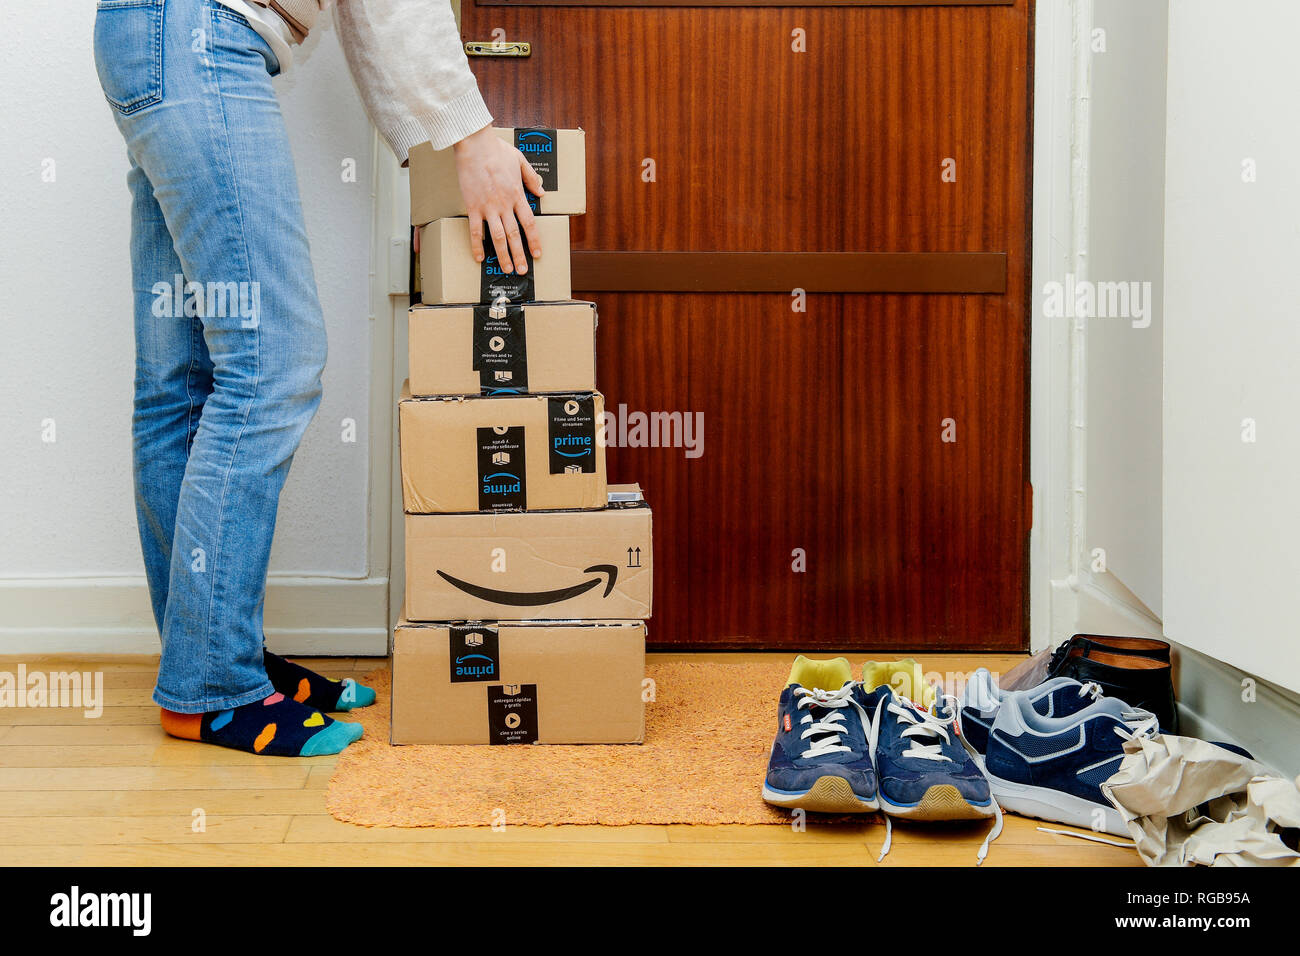 PARIS, FRANCE - JAN 13, 2018: Preparing for Prime Day Amazon Prime packages delivered to a home door woman trying to lift heavy boxes. Stock Photo